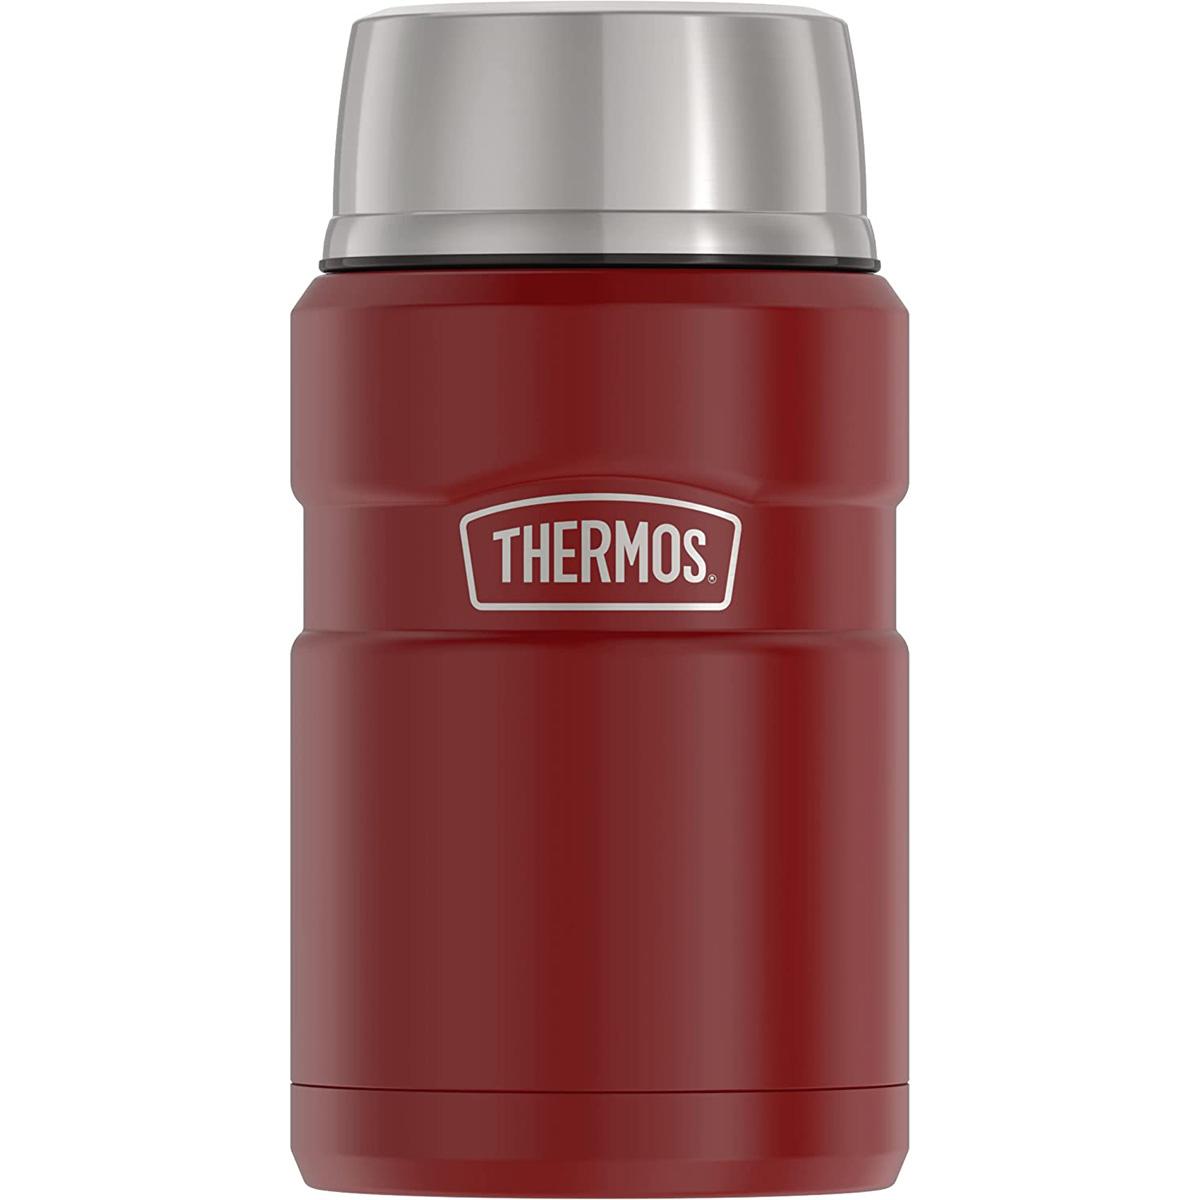 Thermos Stainless King Vacuum-Insulated Food Jar for $19.04